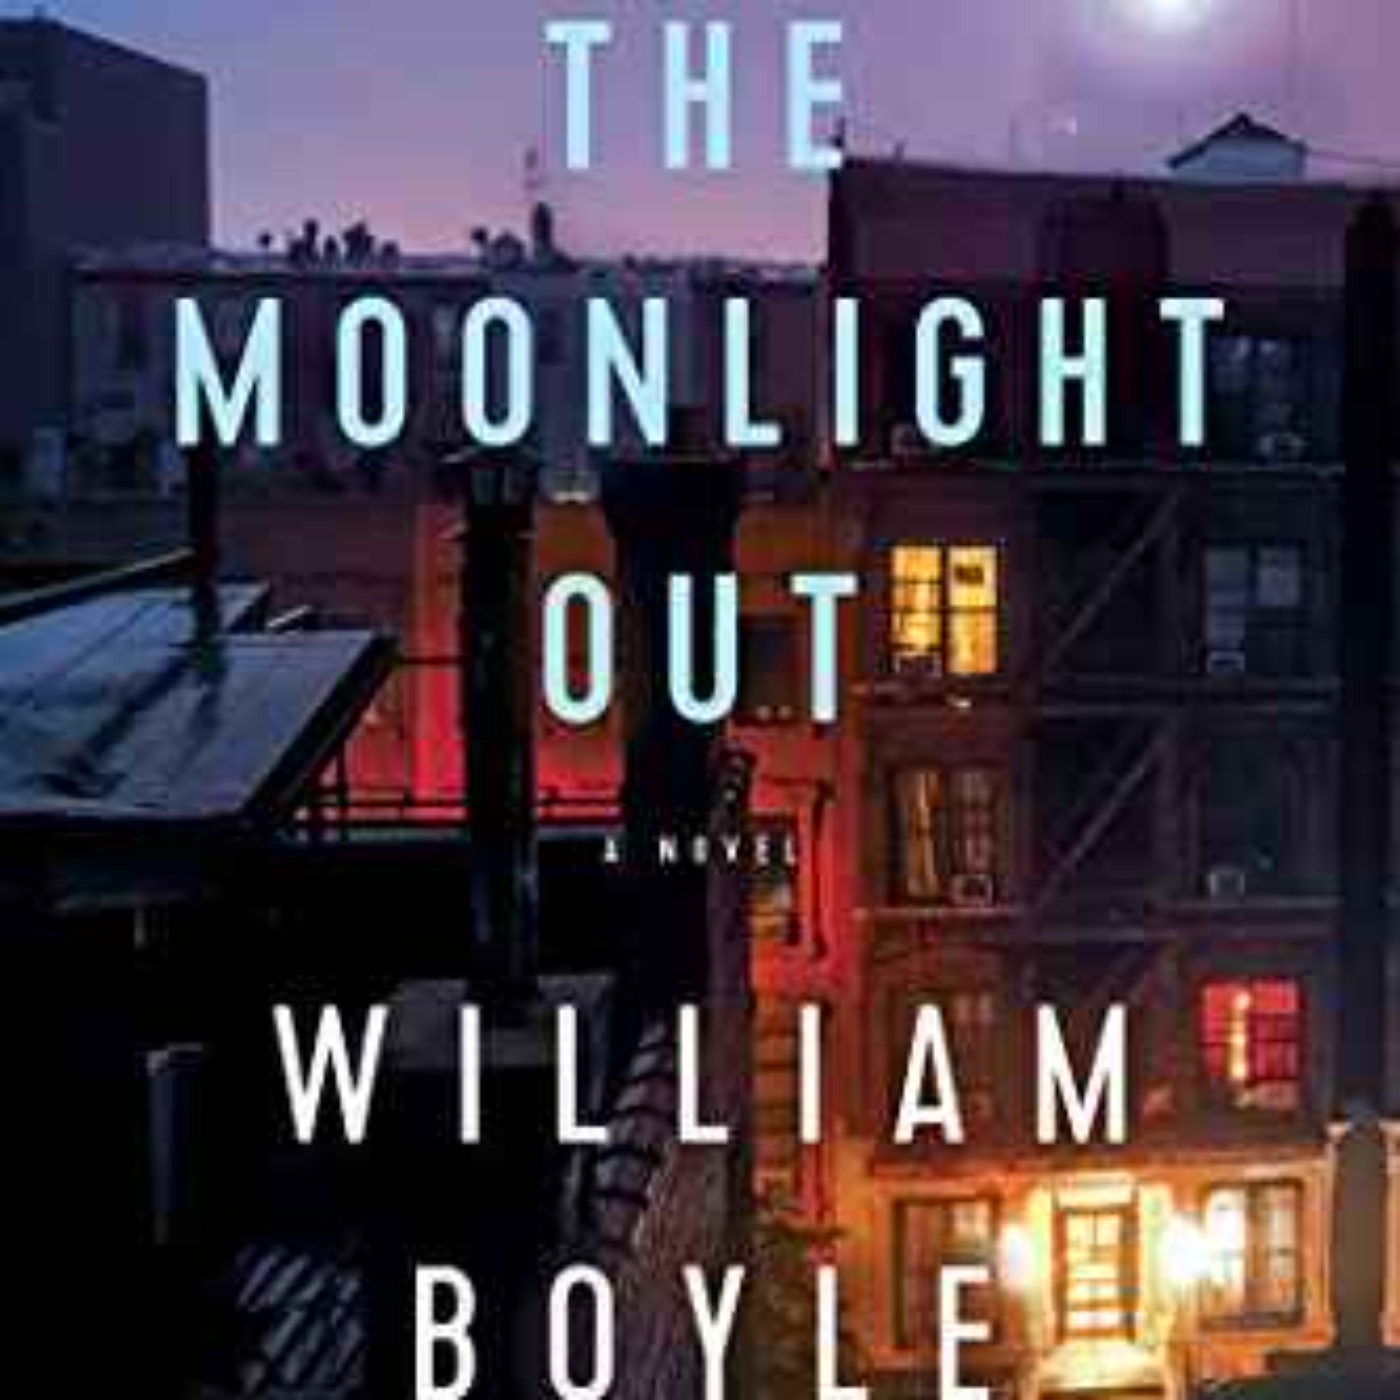 William Boyle - Shoot the Moonlight Out